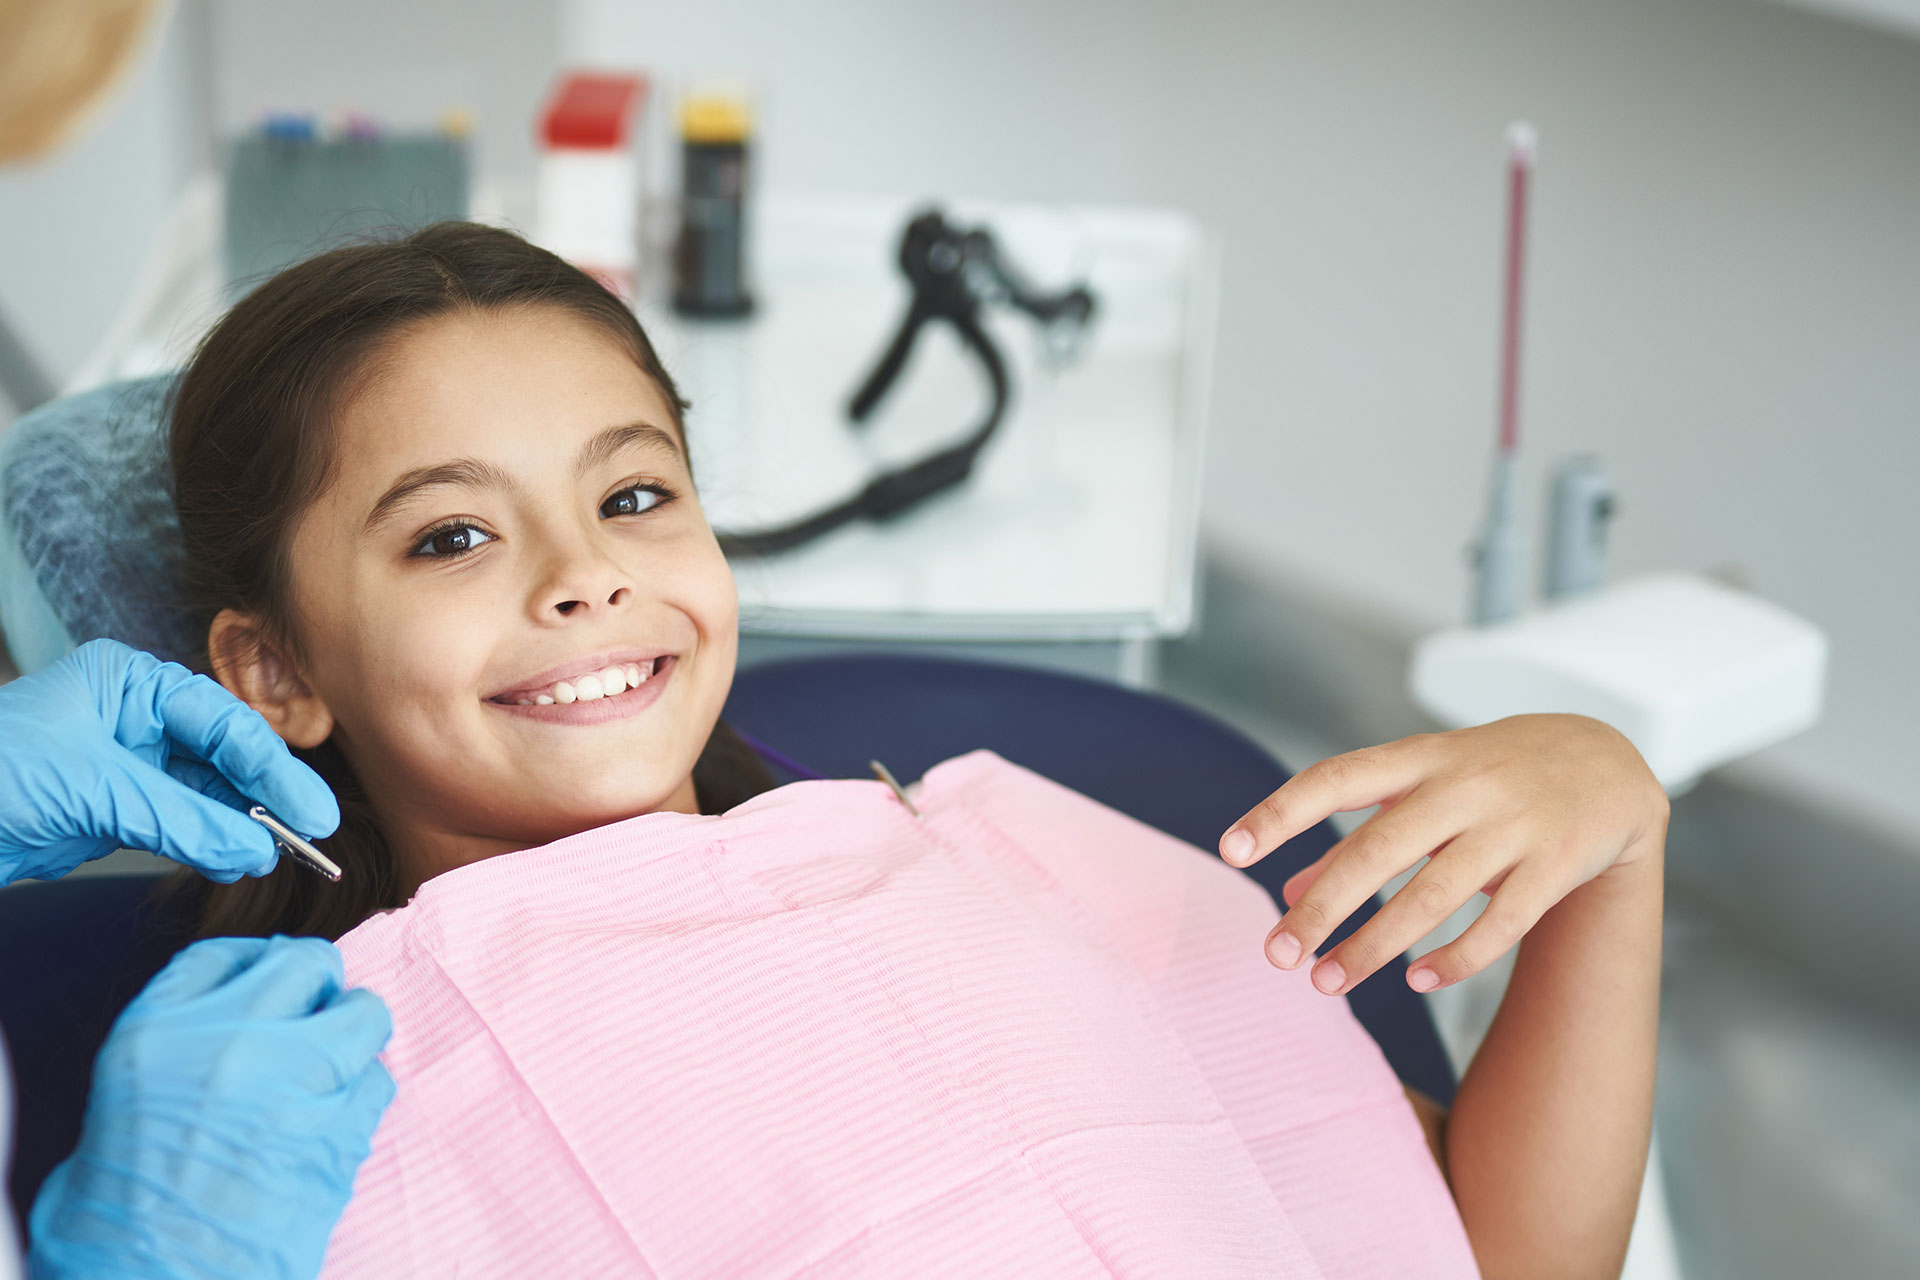 The image shows a young girl sitting in a dental chair, smiling at the camera, with a dentist standing behind her wearing gloves and holding a mirror.